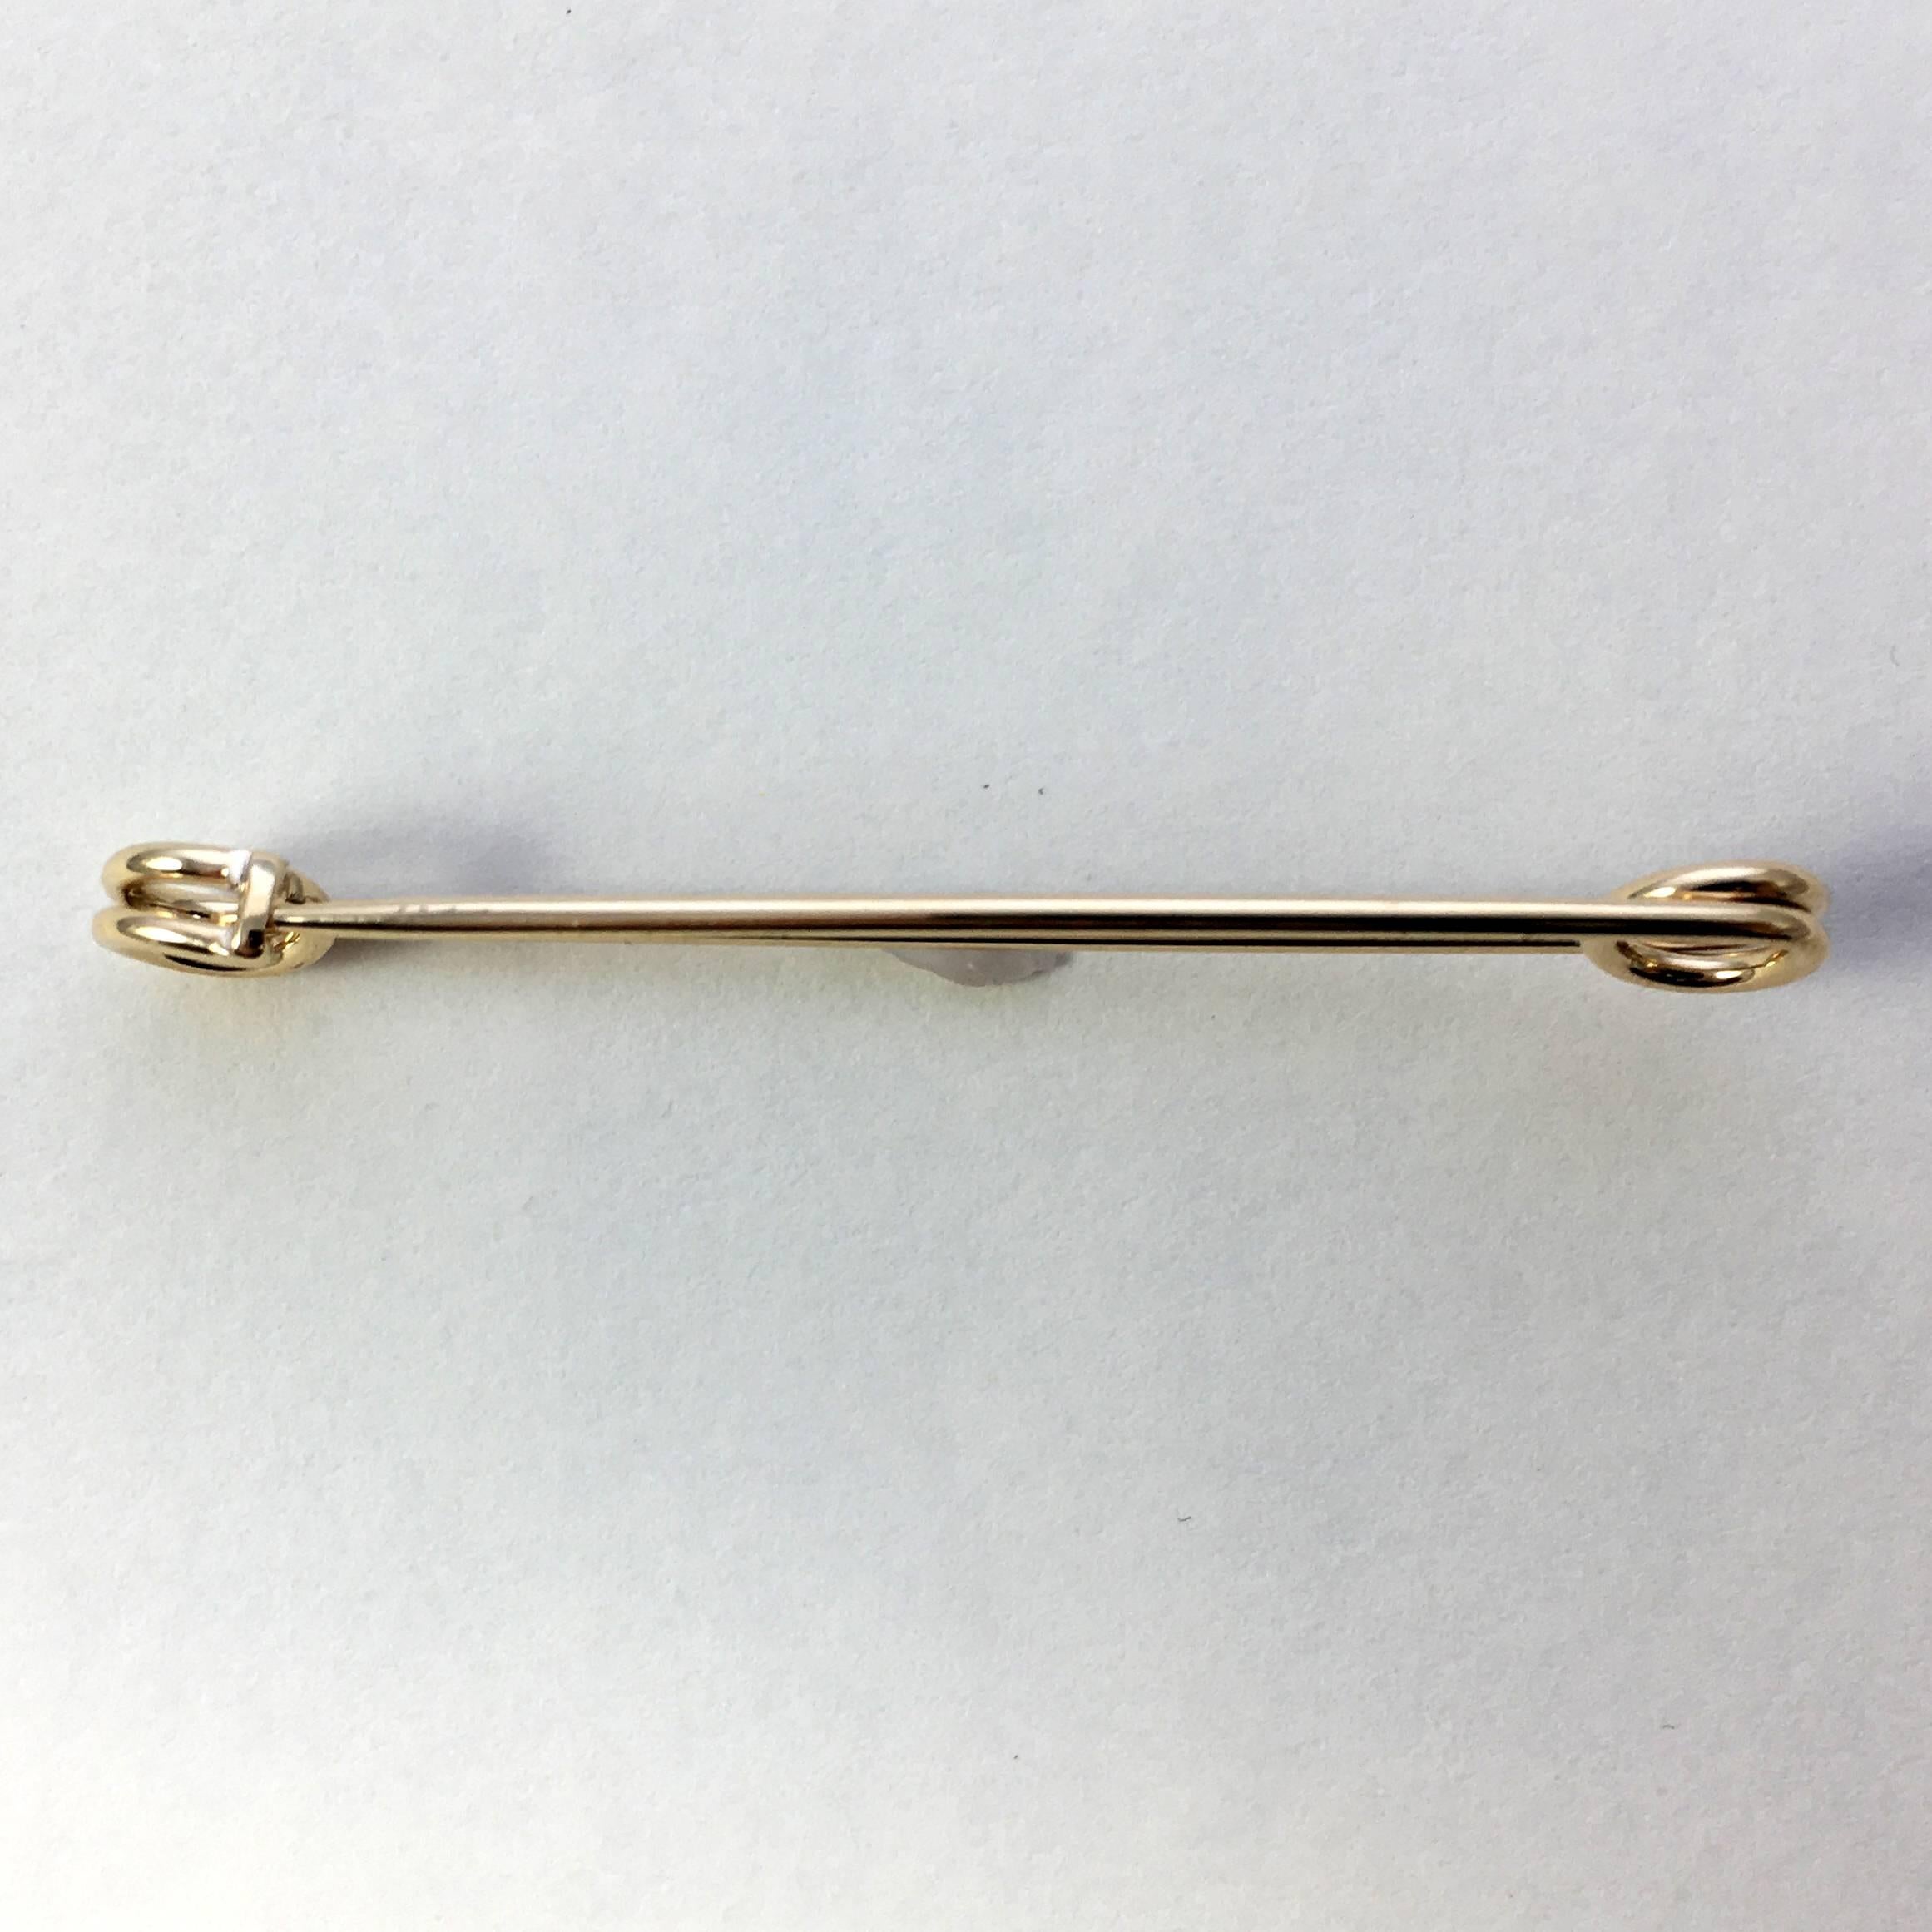 A 14 carat gold safety pin brooch by Tiffany & Co. 

The humble safety pin has been worn in many ways over the years from the heady days of the punk movement through to more recently as a symbol of resistance, security and solidarity. 

Signed